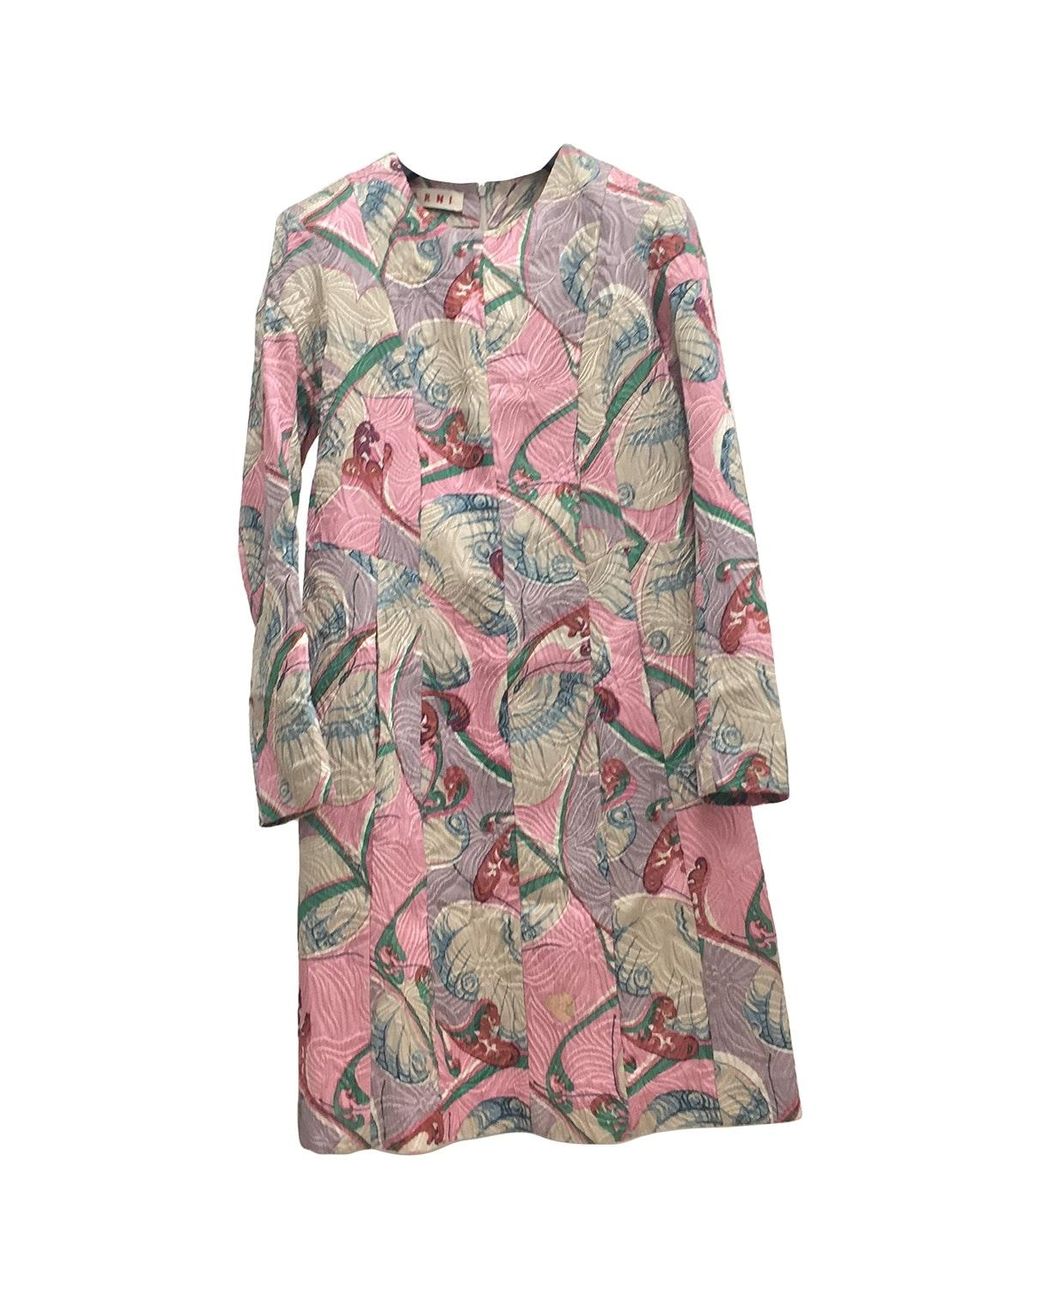 Marni Synthetic Mid-length Dress in Pink - Lyst